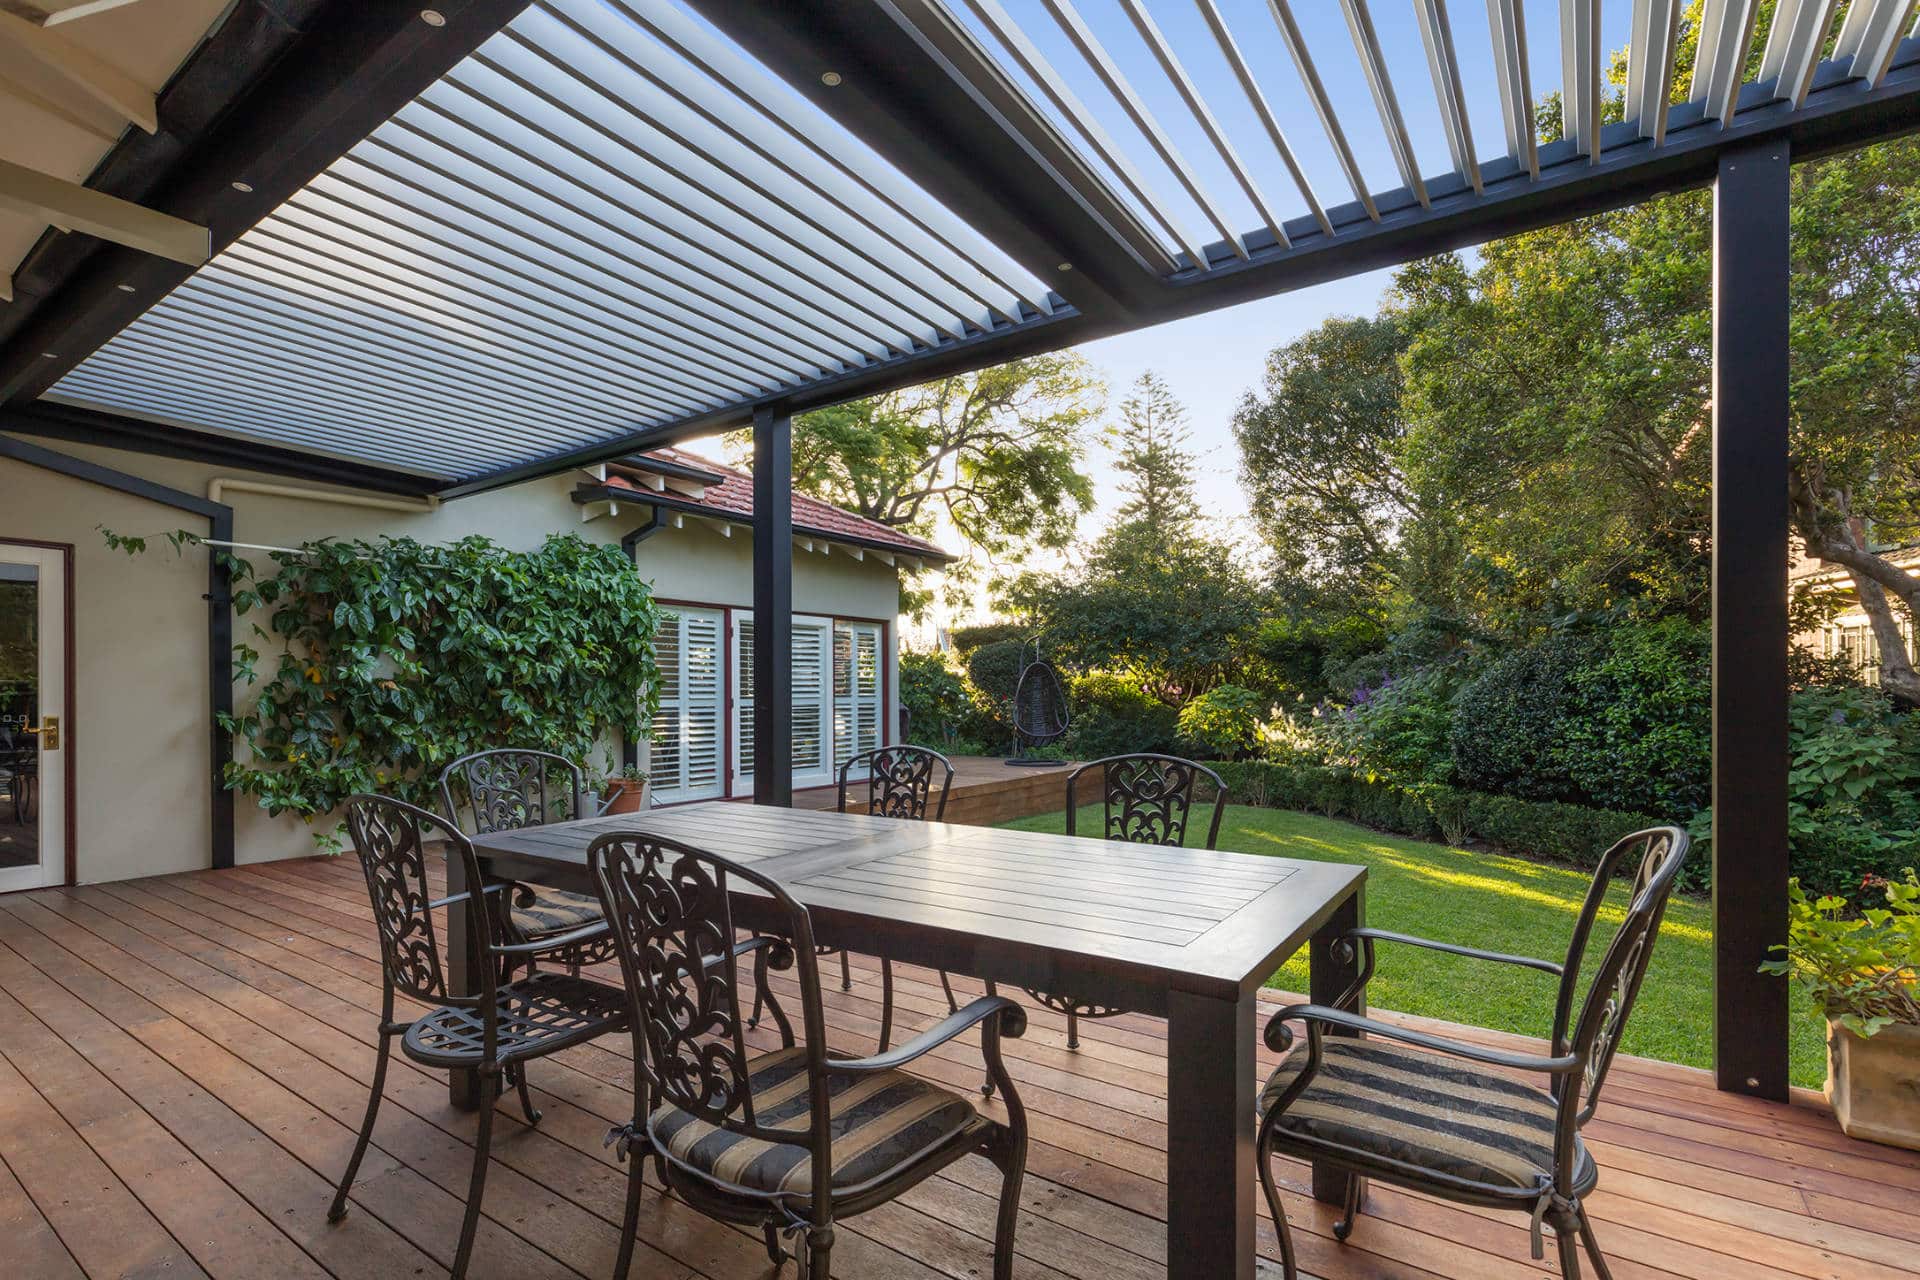 Dining table and chairs under the Chatswood pergola.